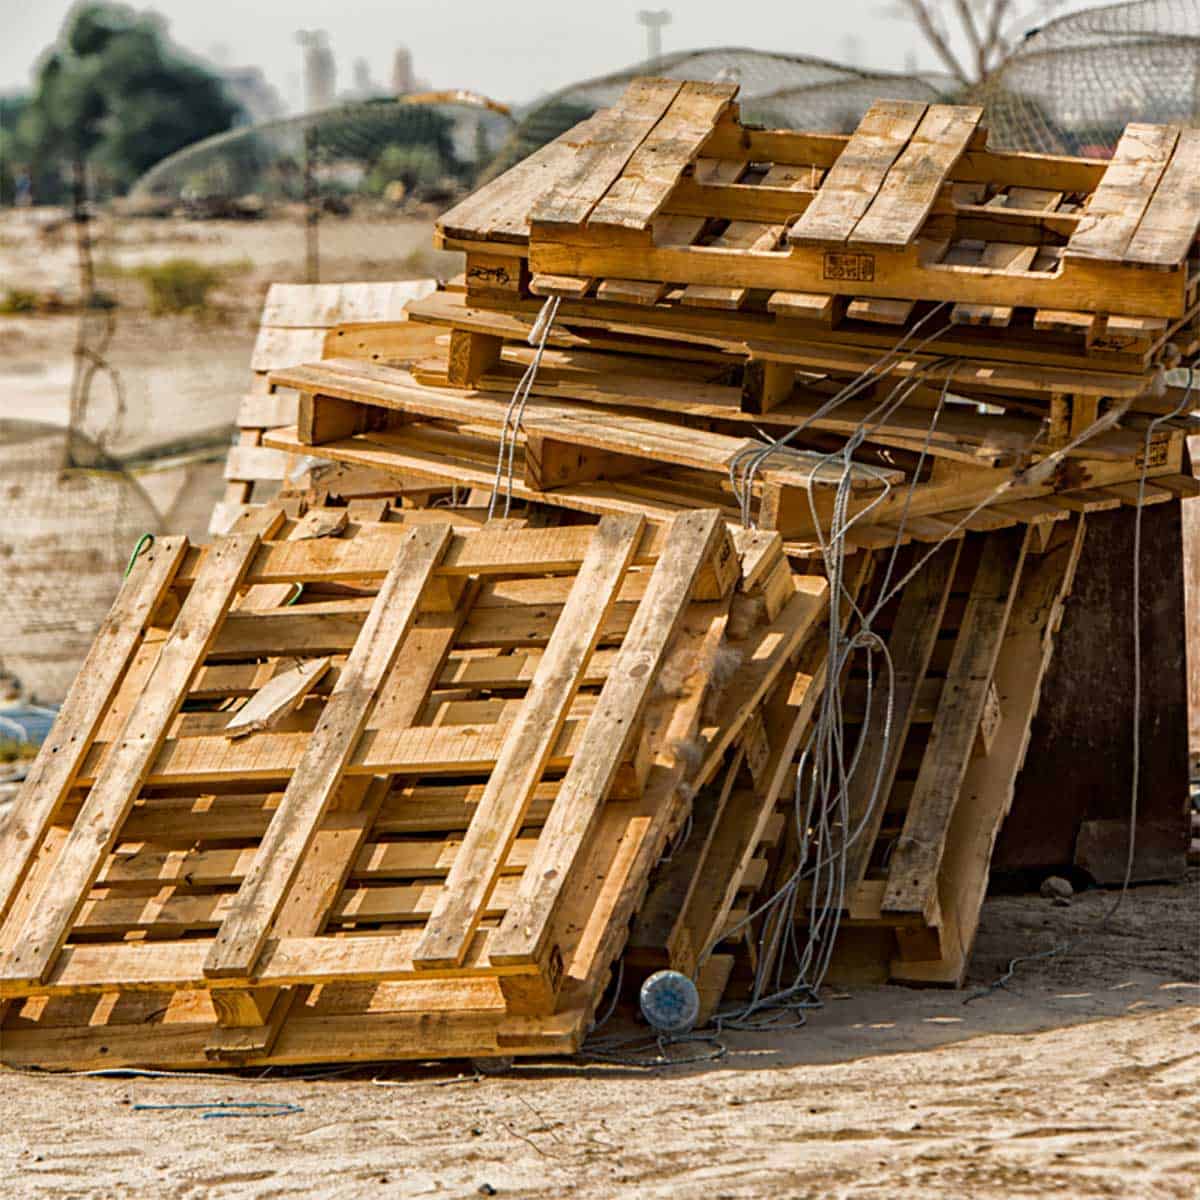 Wooden or plastic pallets? What is more practical at work?